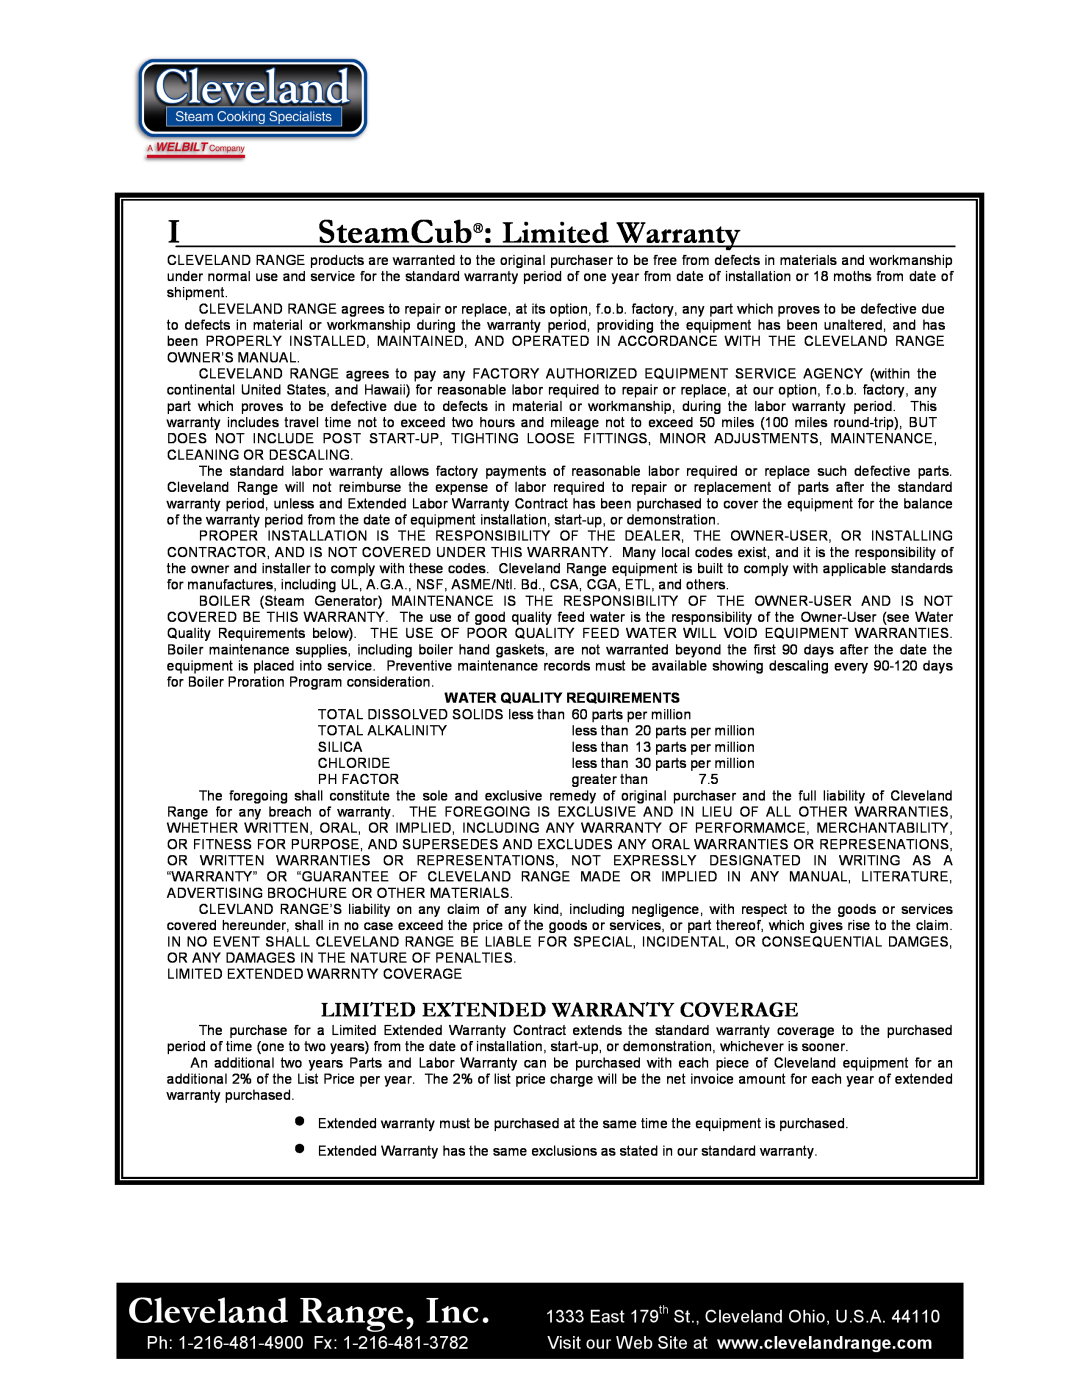 Cleveland Range 1SCE manual Cleveland Range, Inc, SteamCub Limited Warranty, Limited Extended Warranty Coverage 